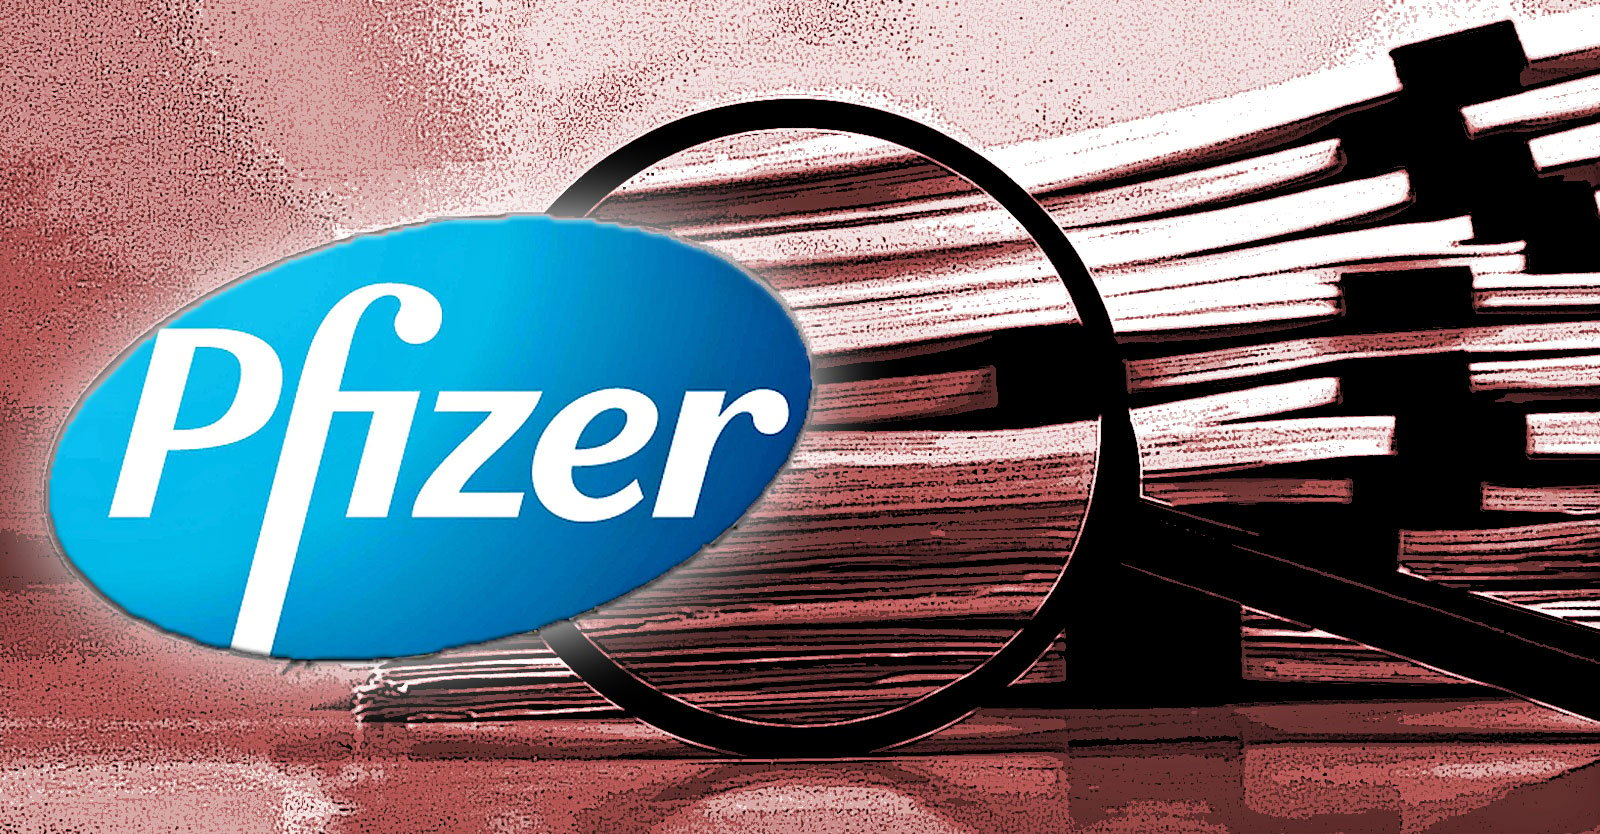 How Pfizer Hid Nearly 80% Of COVID Vaccine Trial Deaths From Regulators